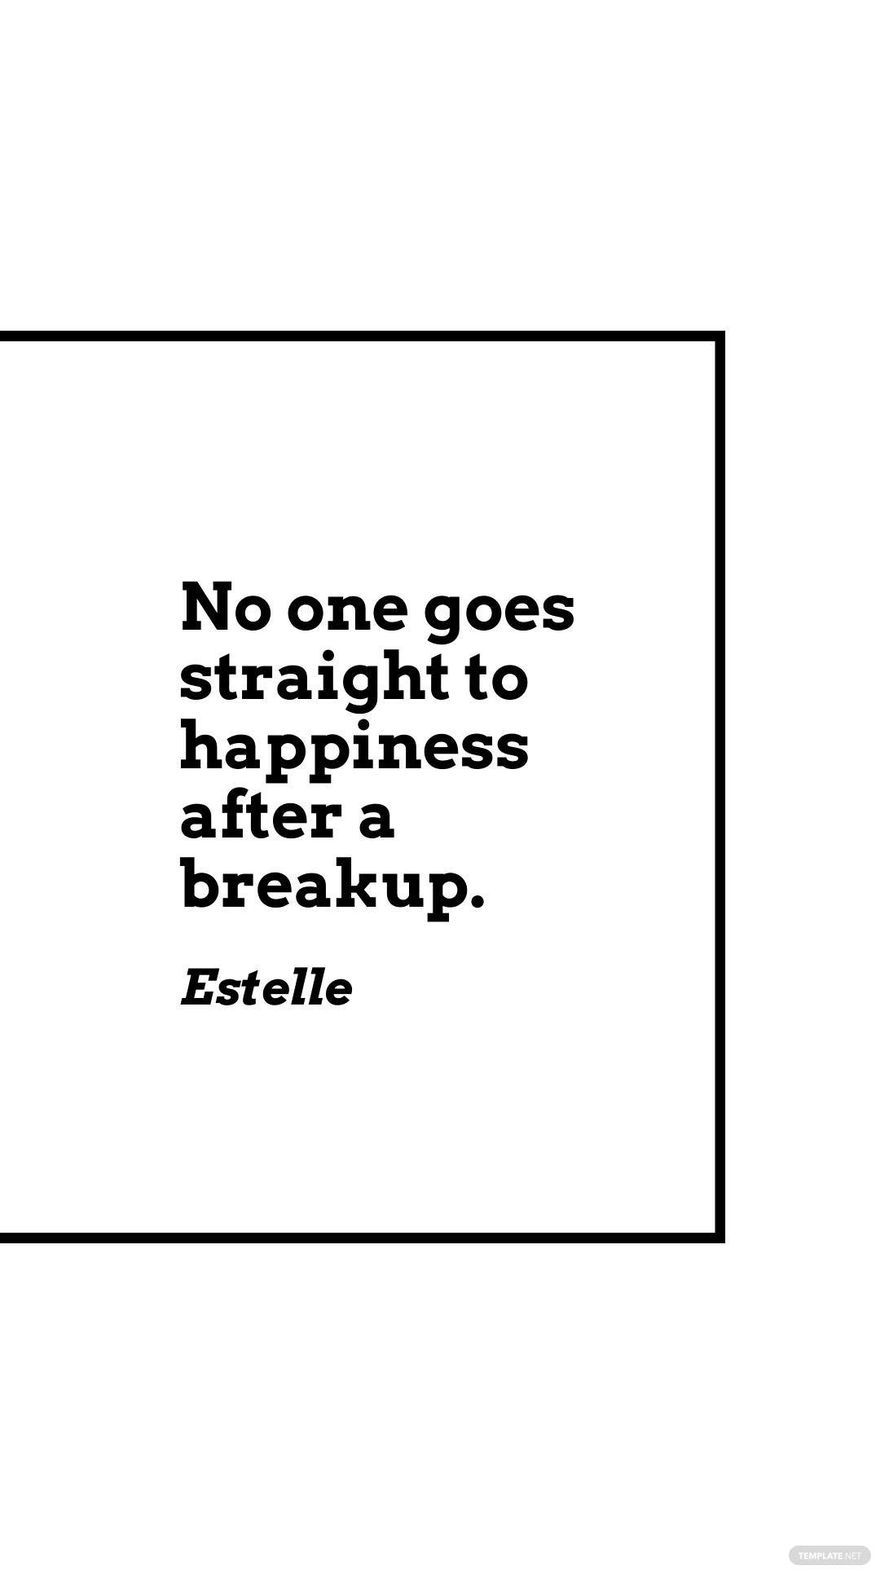 Free Estelle - No one goes straight to happiness after a breakup. in JPG